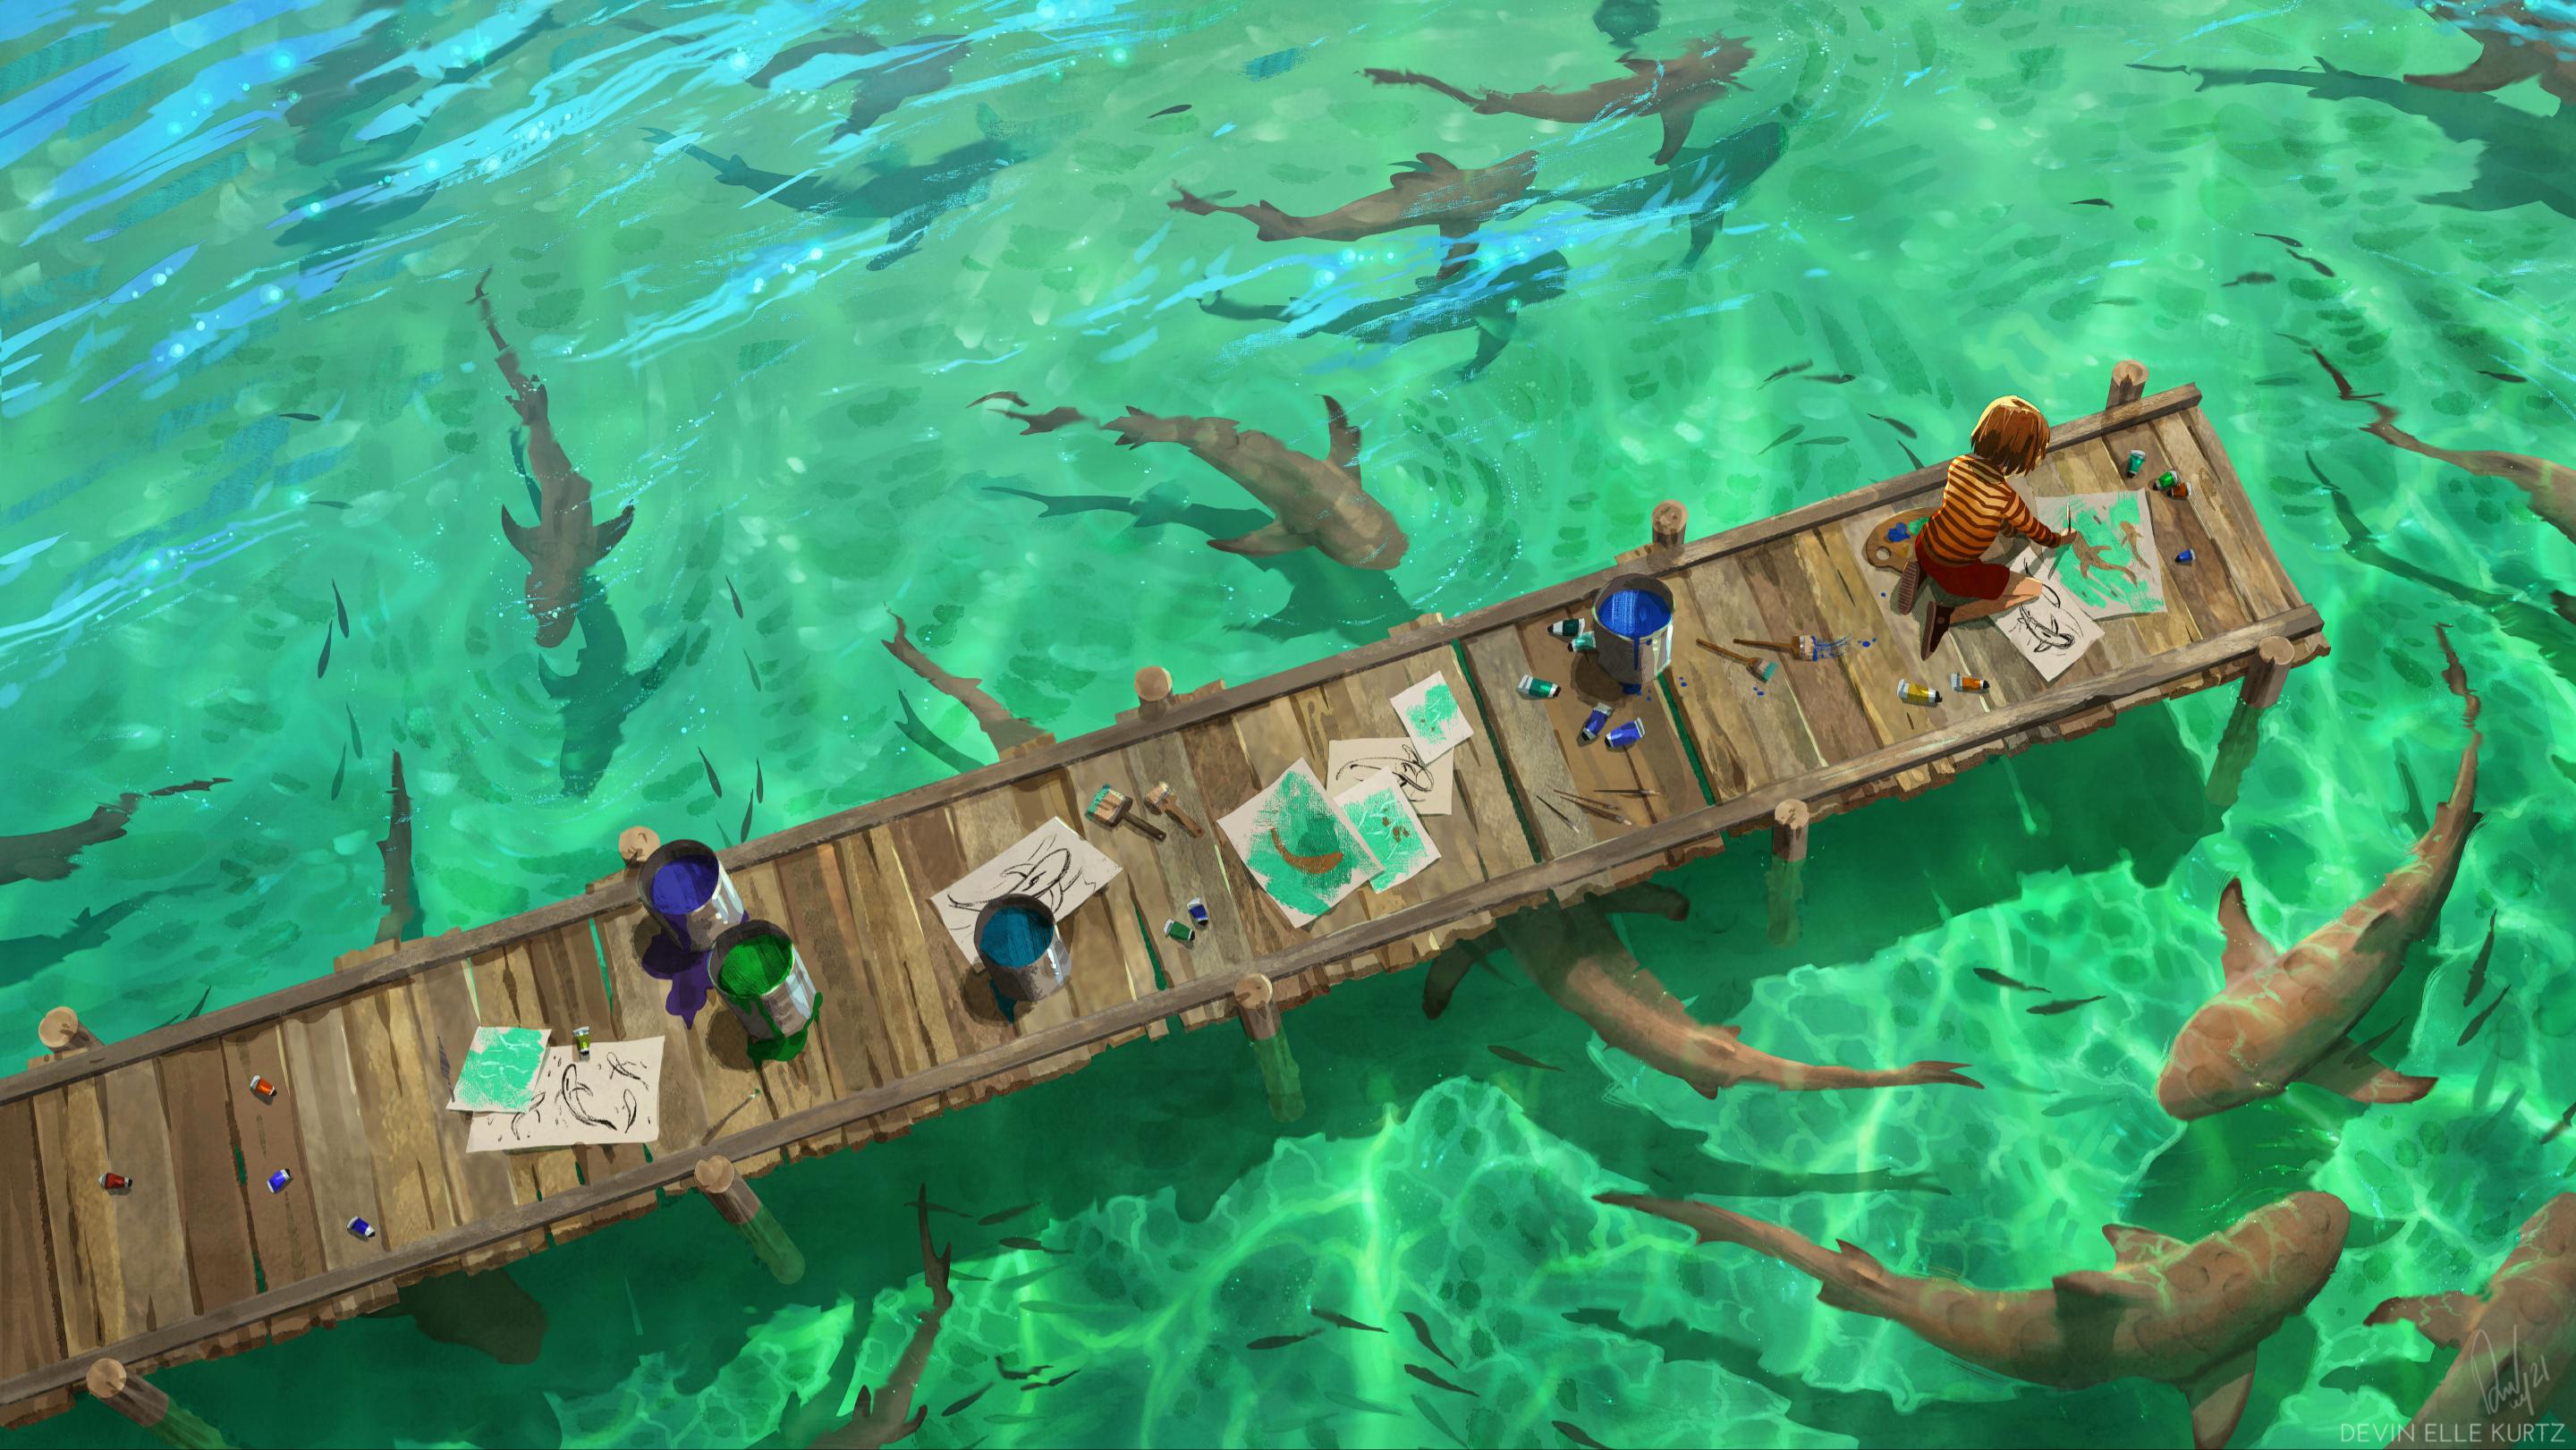 Concept art of a man and a woman sitting on a dock surrounded by fish. - Koi fish, fish